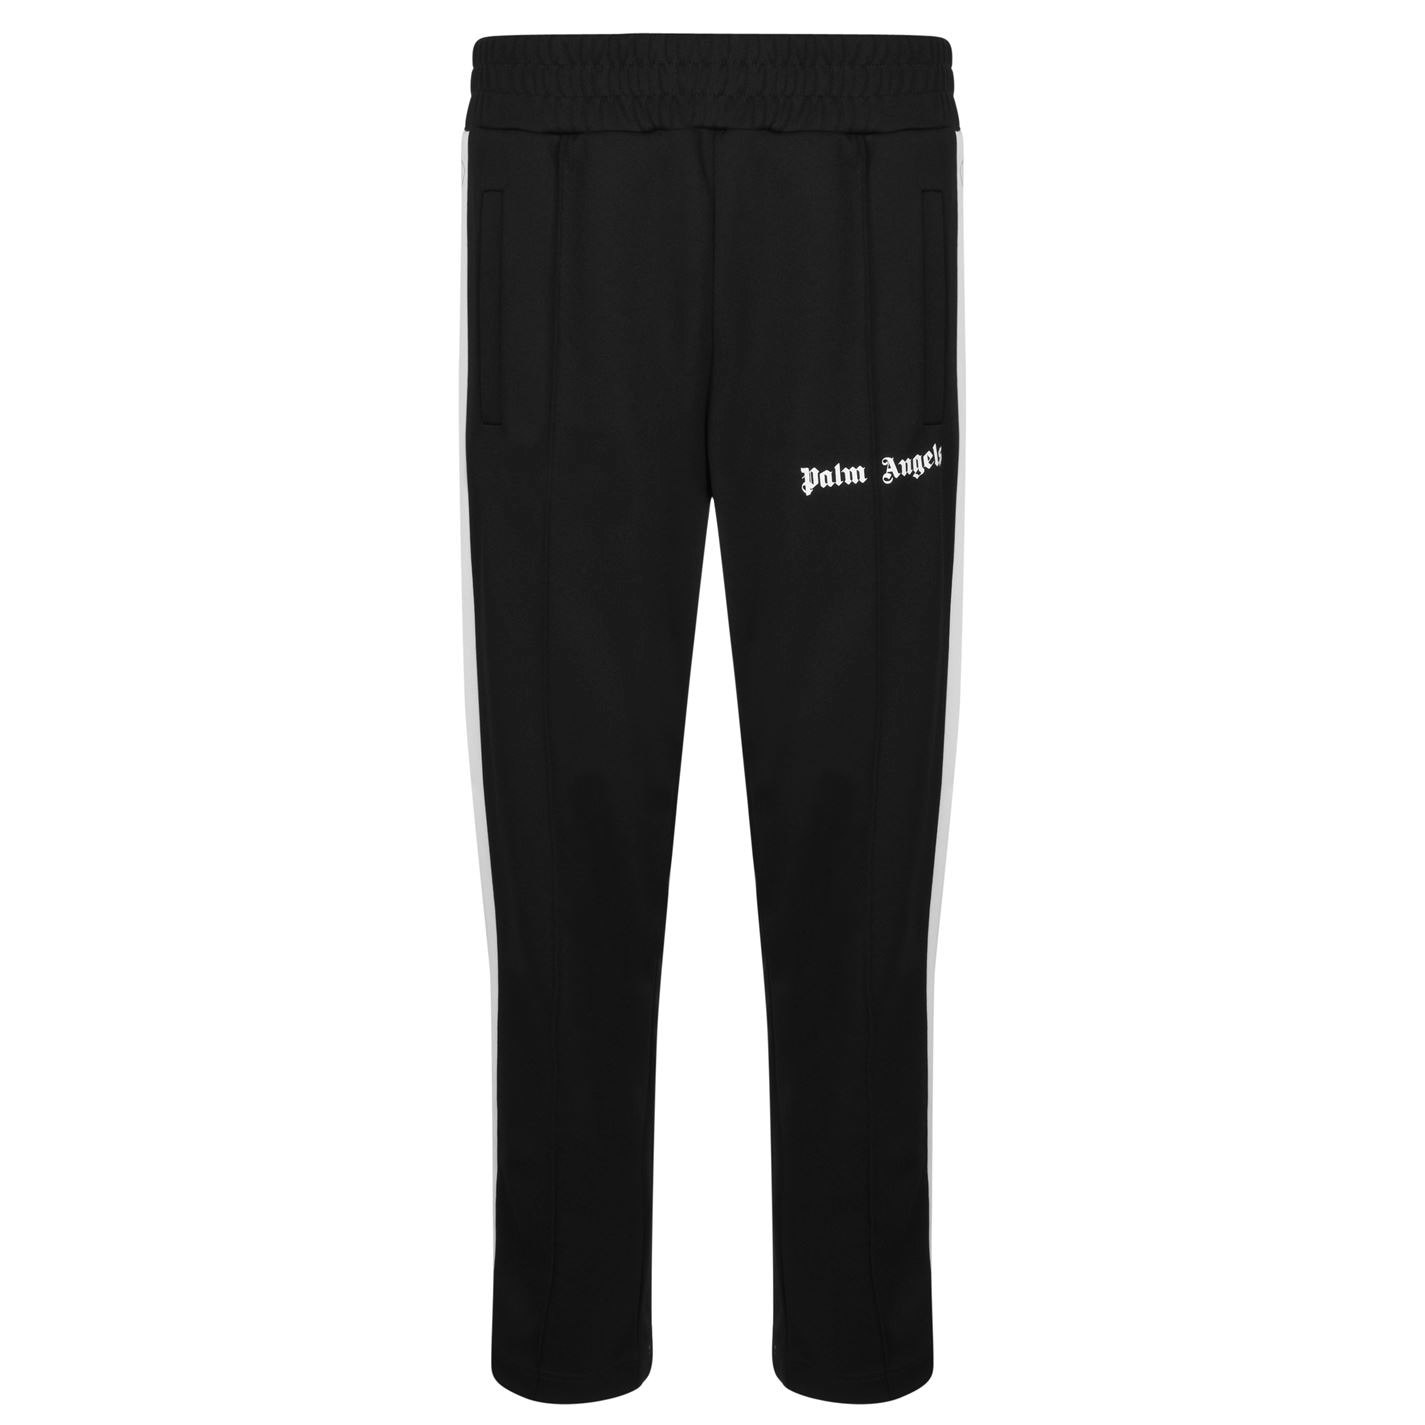 Trackpants: Buy Men Black Polyester Trackpants at Cliths